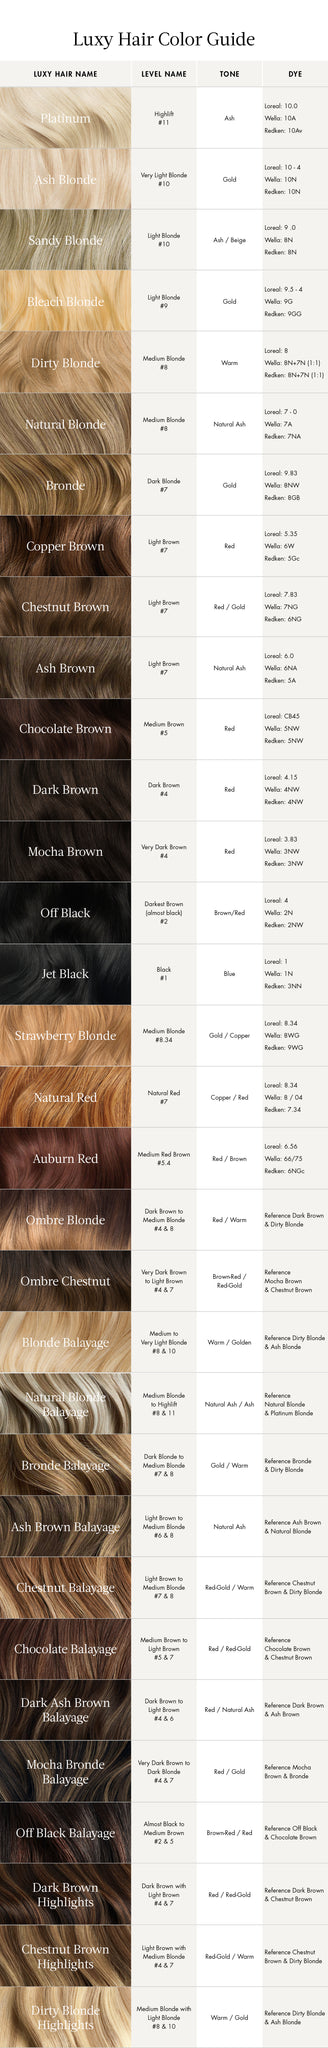 Hair Color Level Chart